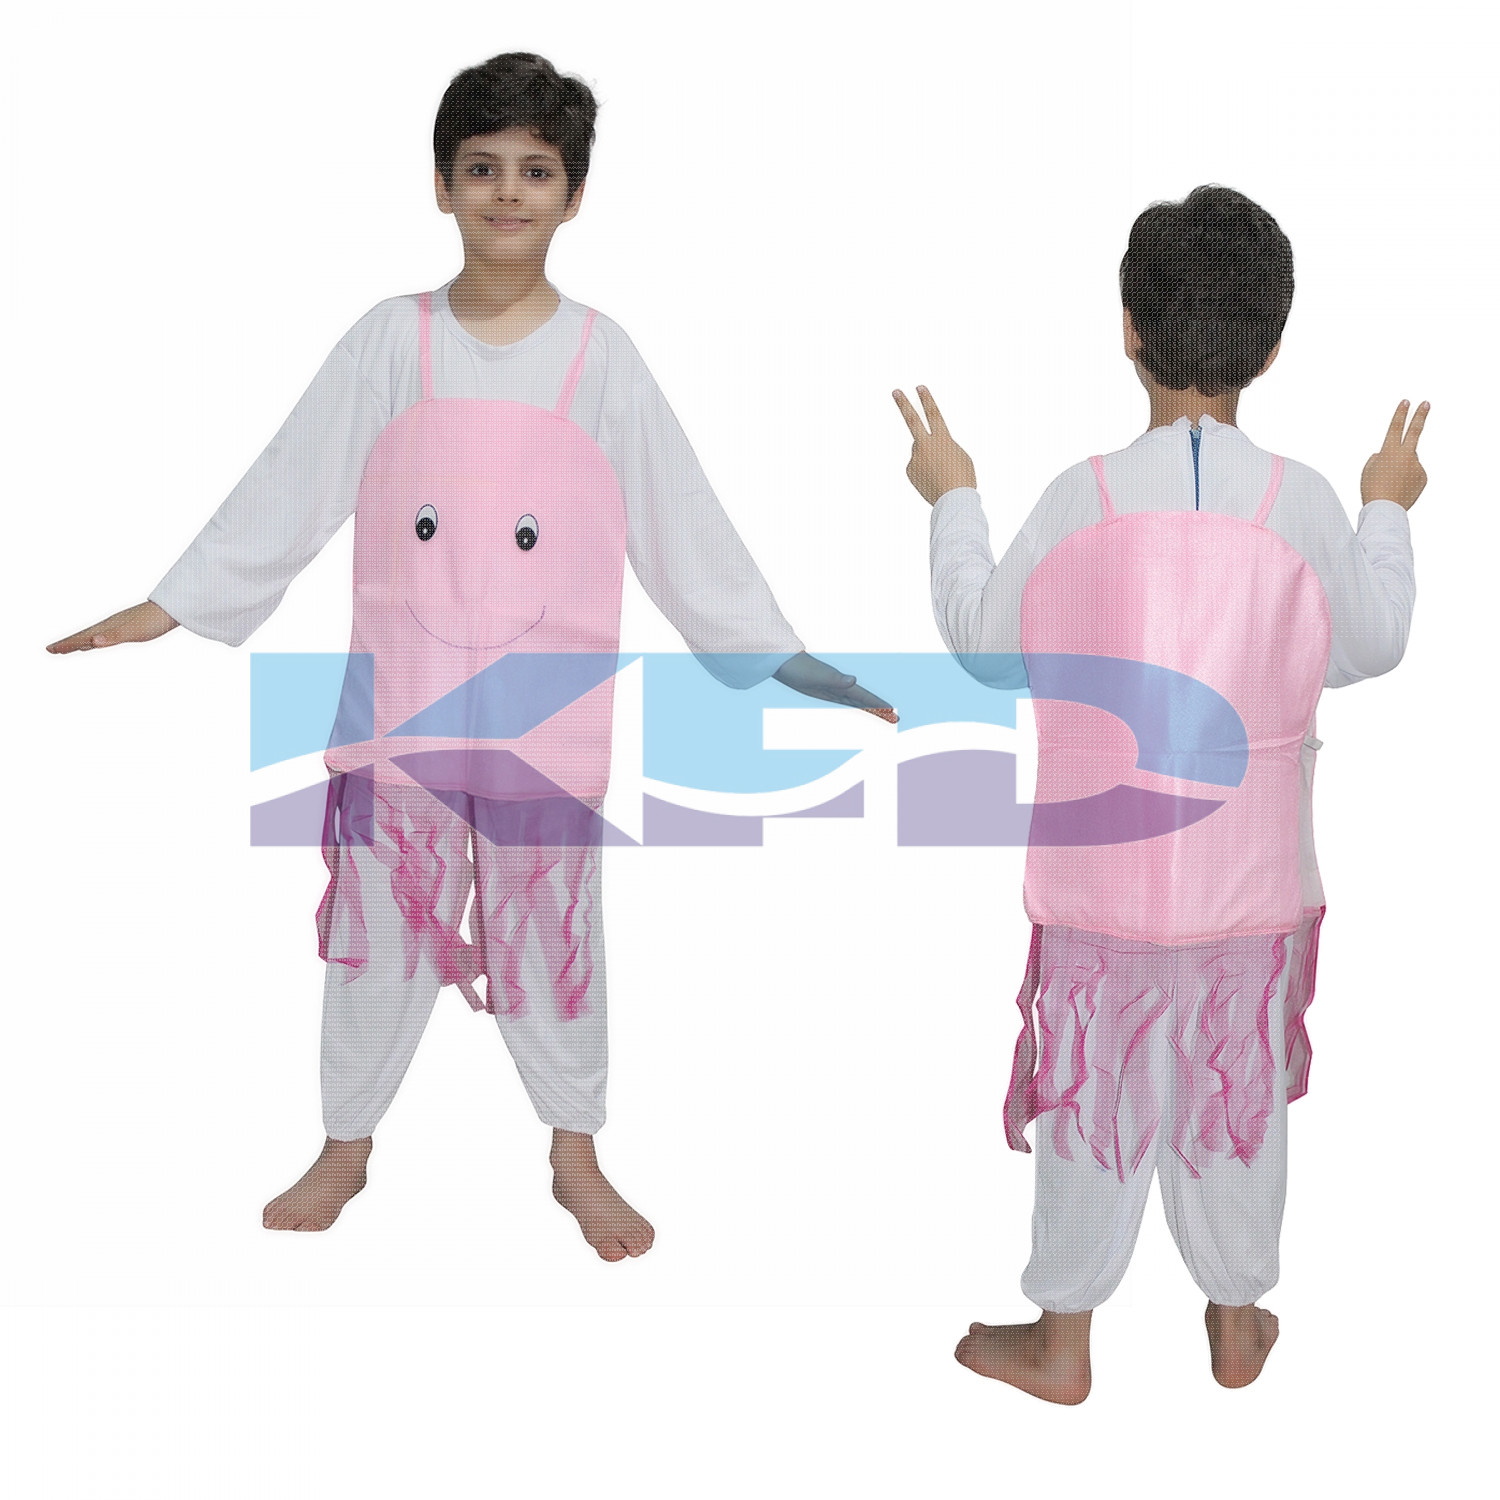 Jelly Fish fancy dress for kids,Insect Costume for School Annual function/Theme Party/Competition/Stage Shows Dress